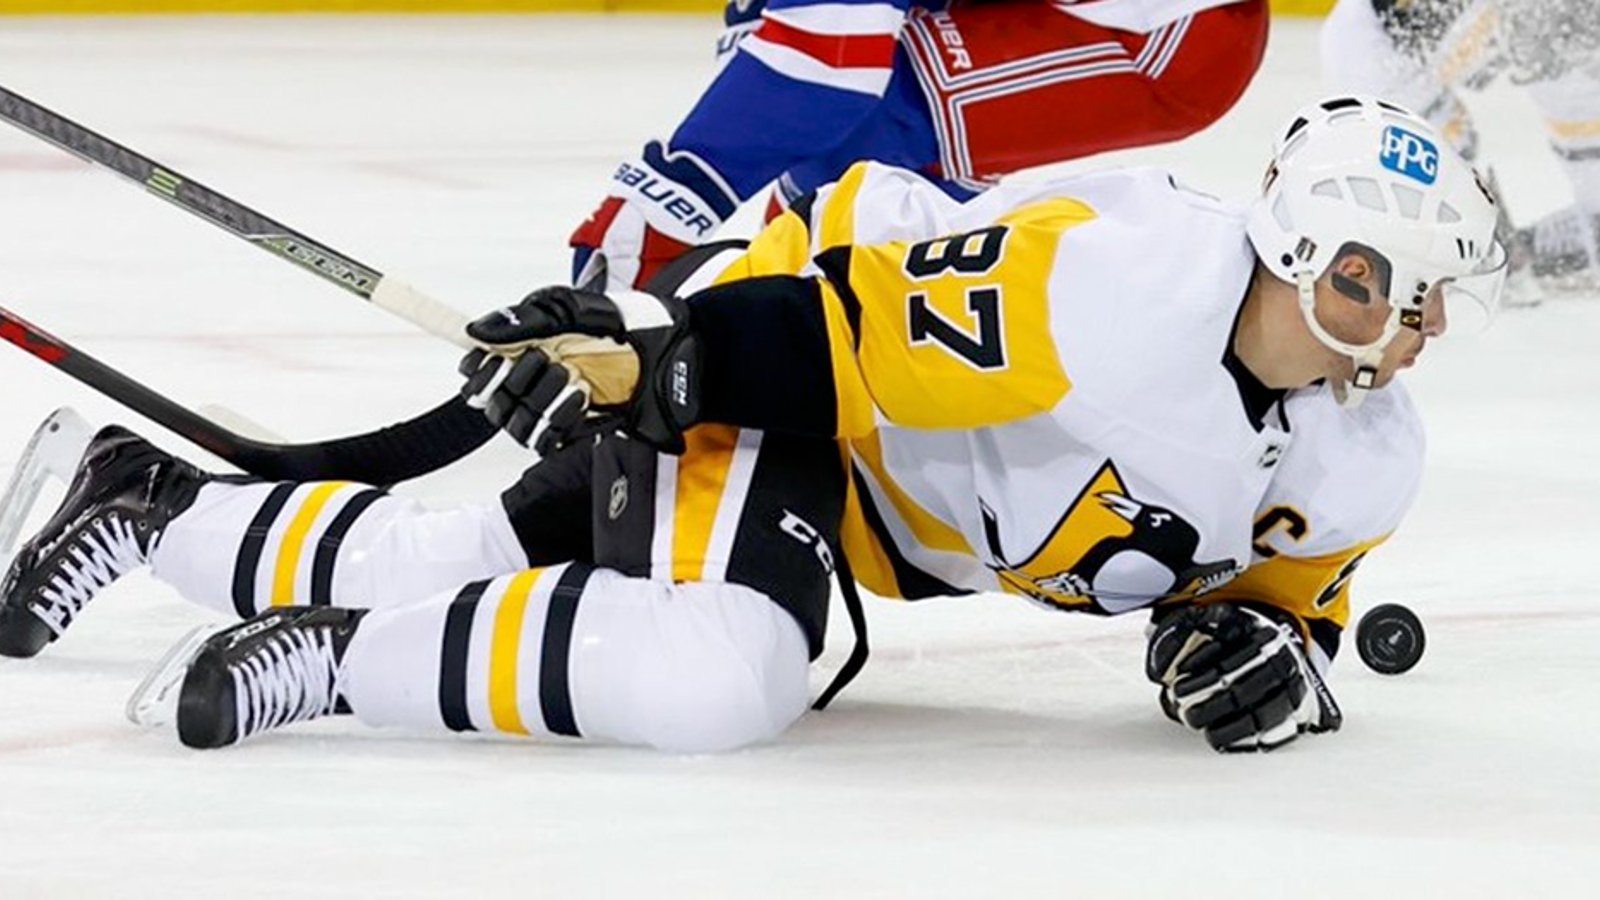 UH OH: The worst is confirmed for Penguins captain Sidney Crosby